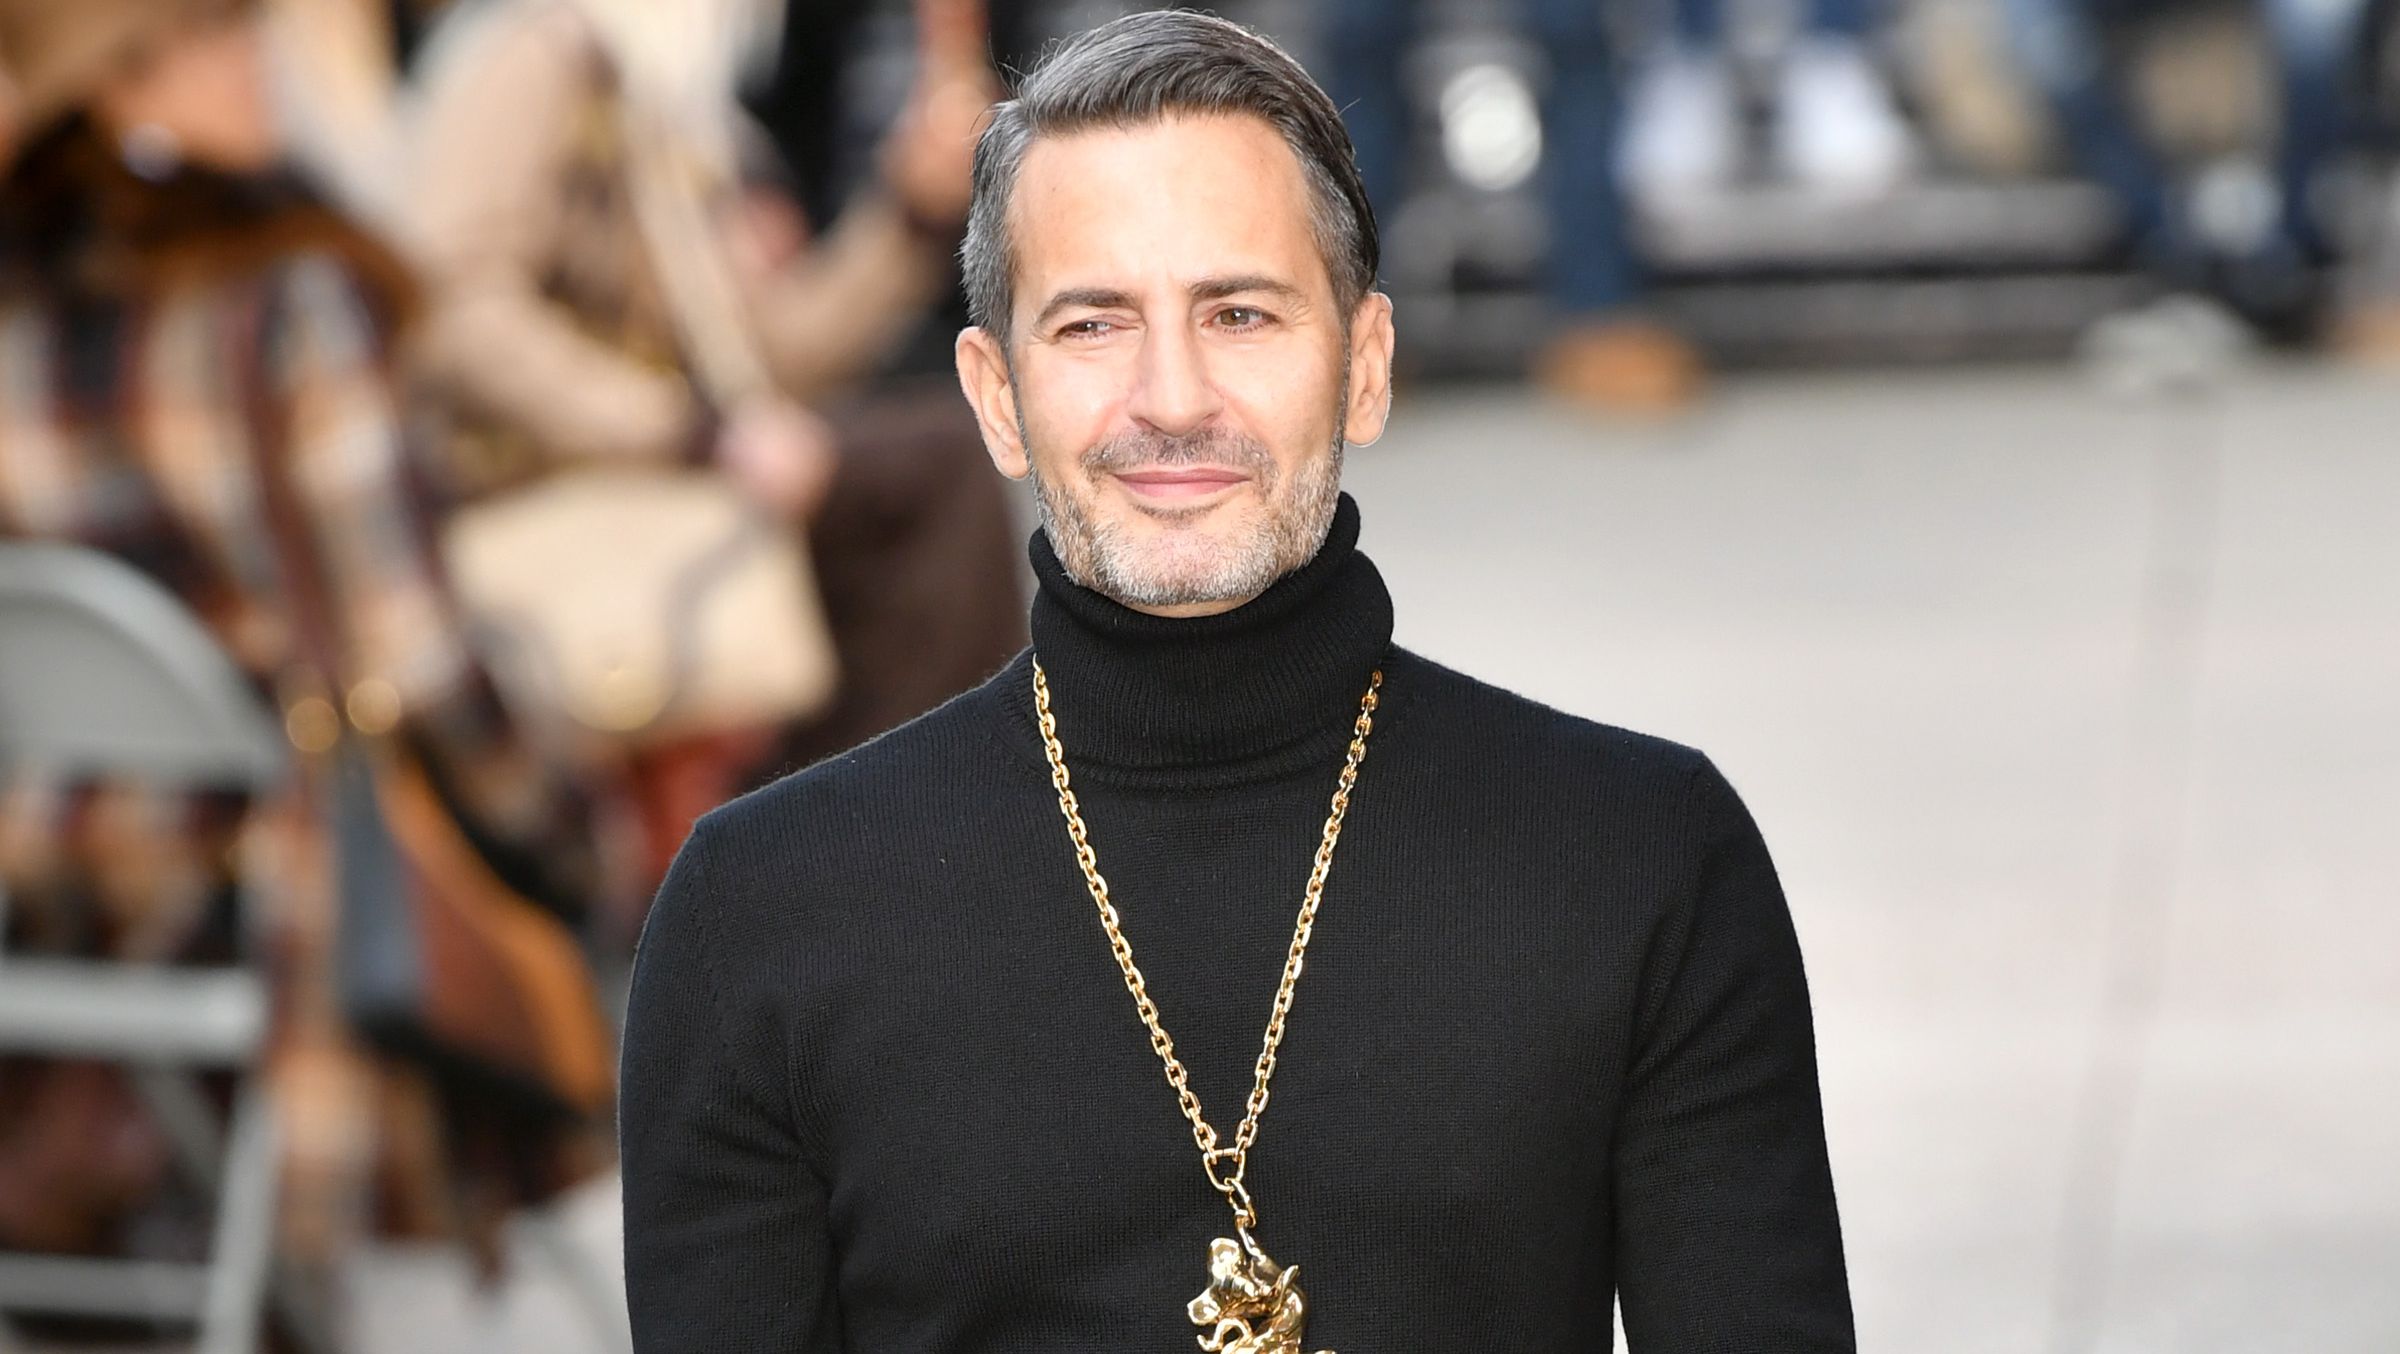 Marc Jacobs: An Overview of the Fashion Designer's Career - 2023